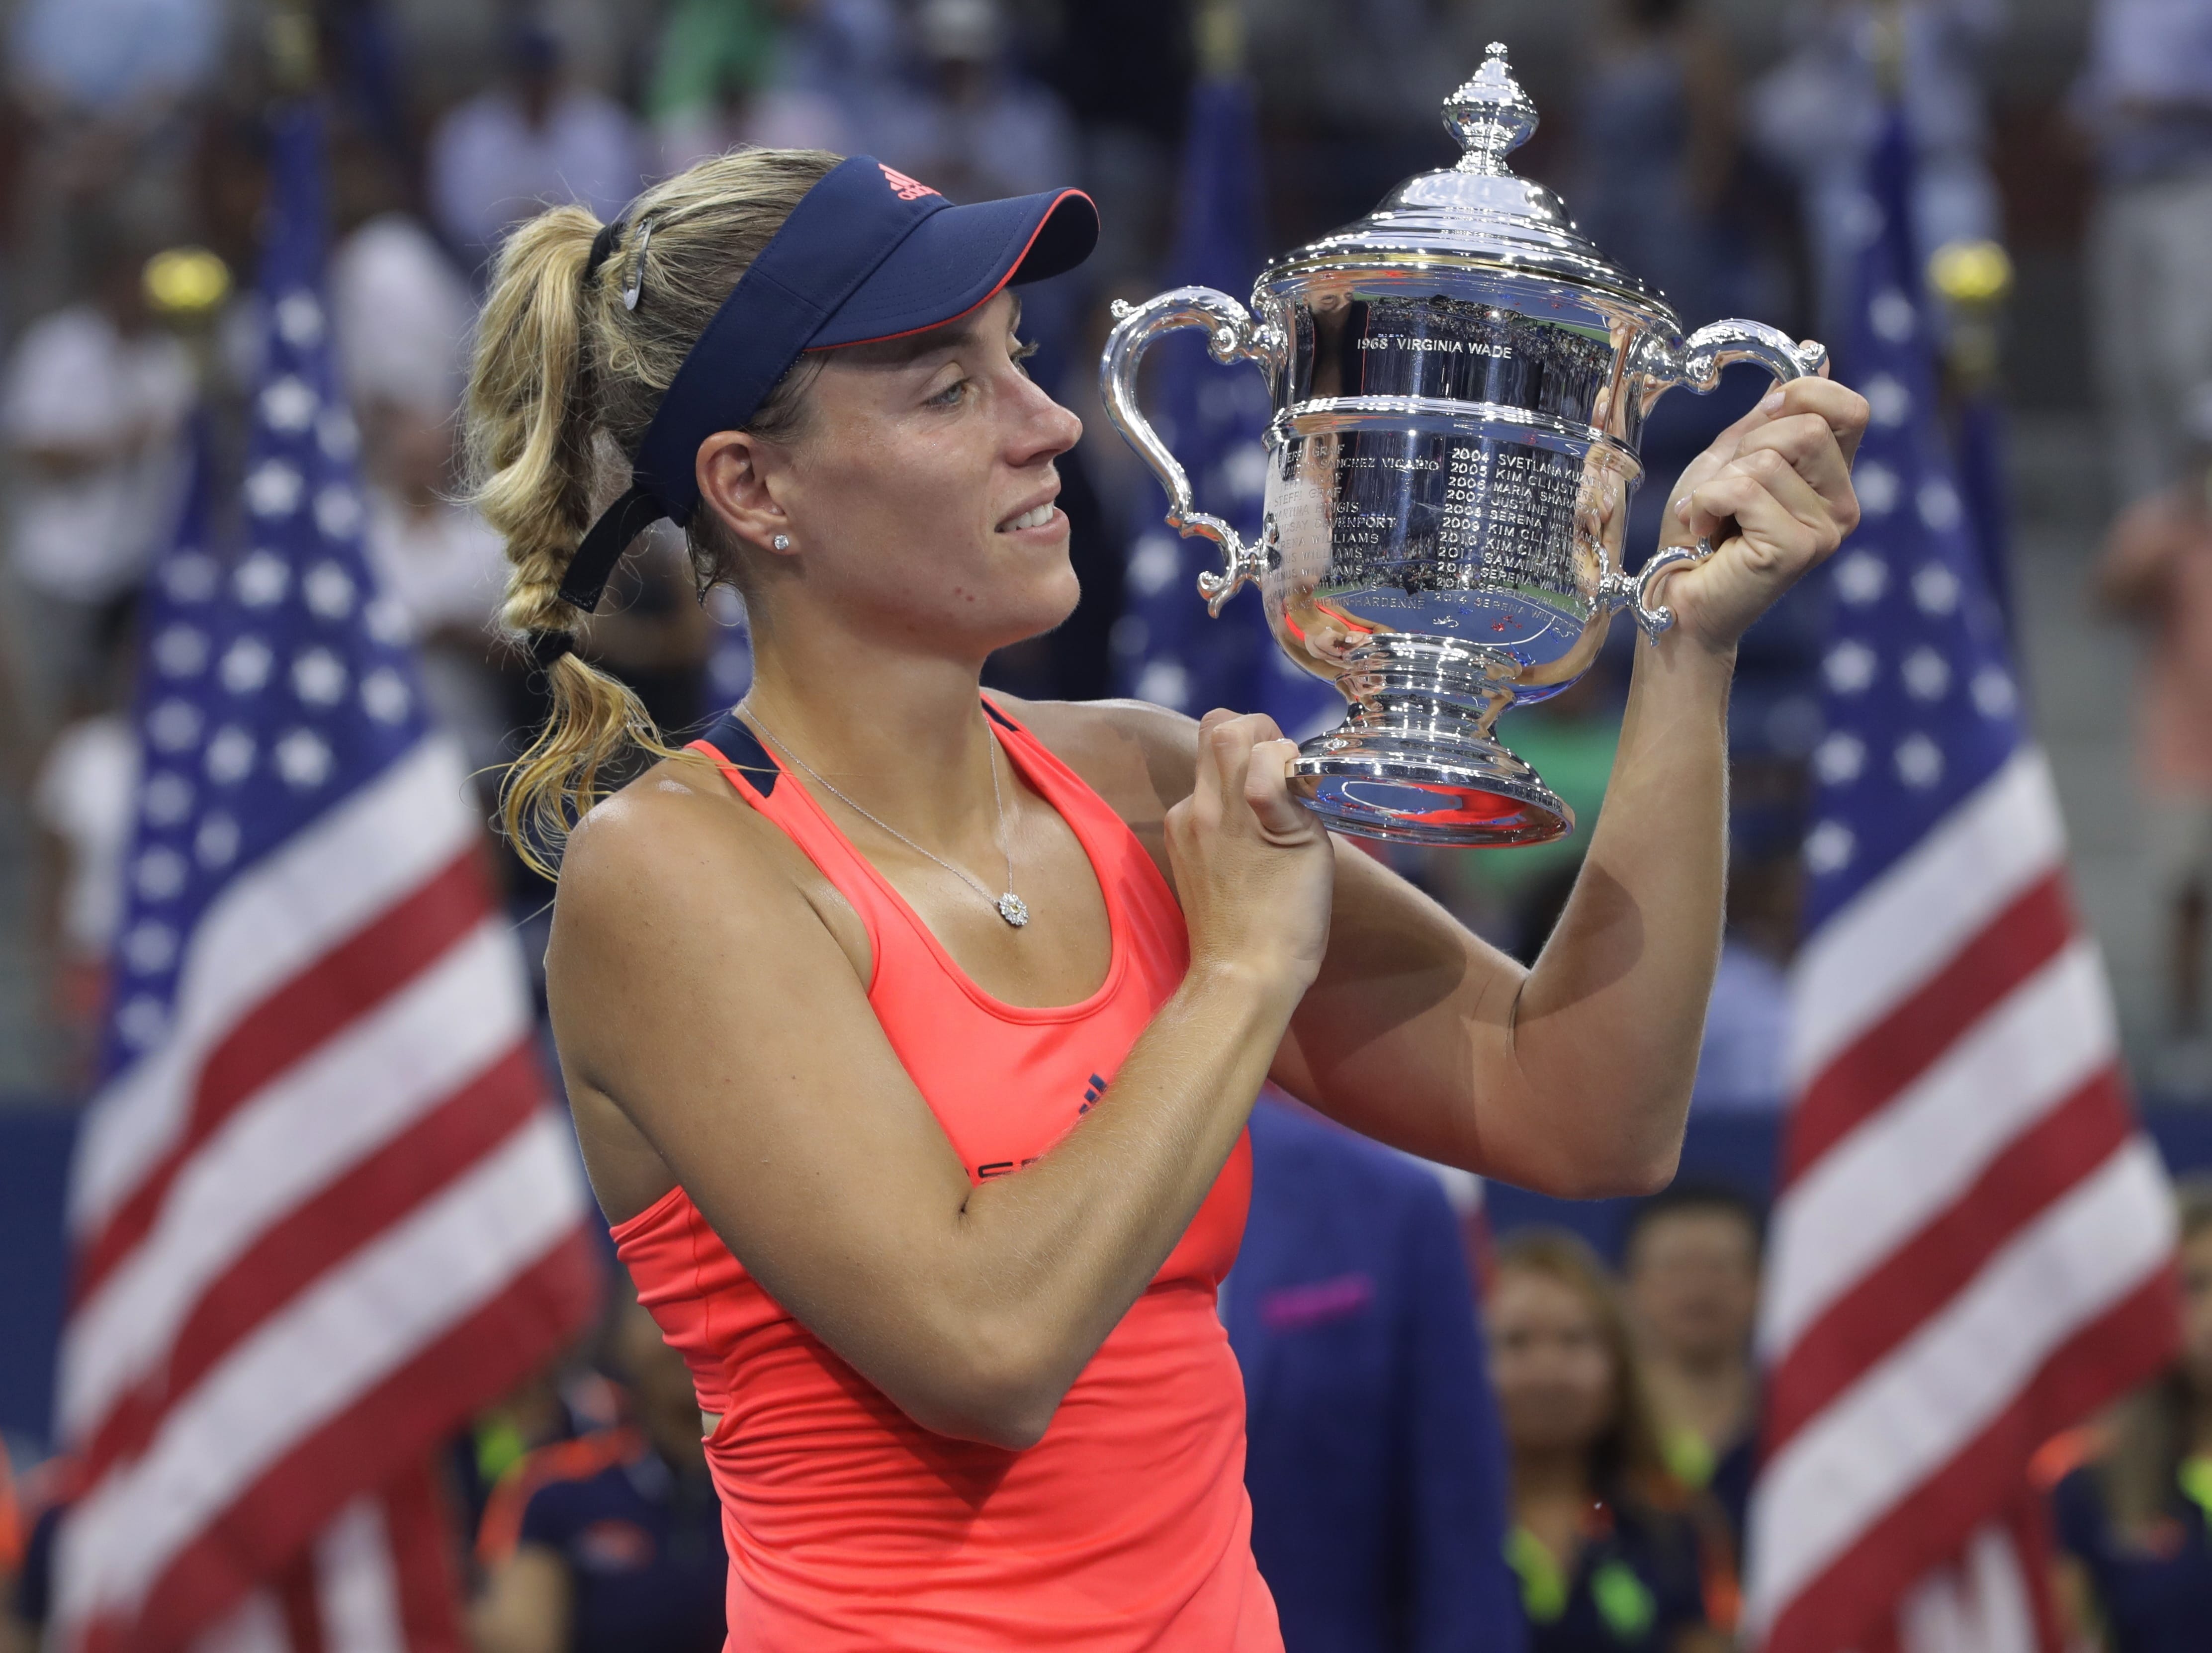 Angelique Kerber, of Germany, holds up the championship trophy after beating Karolina Pliskova, of the Czech Republic, to win the women's singles final of the U.S. Open tennis tournament, Saturday, Sept. 10, 2016, in New York.